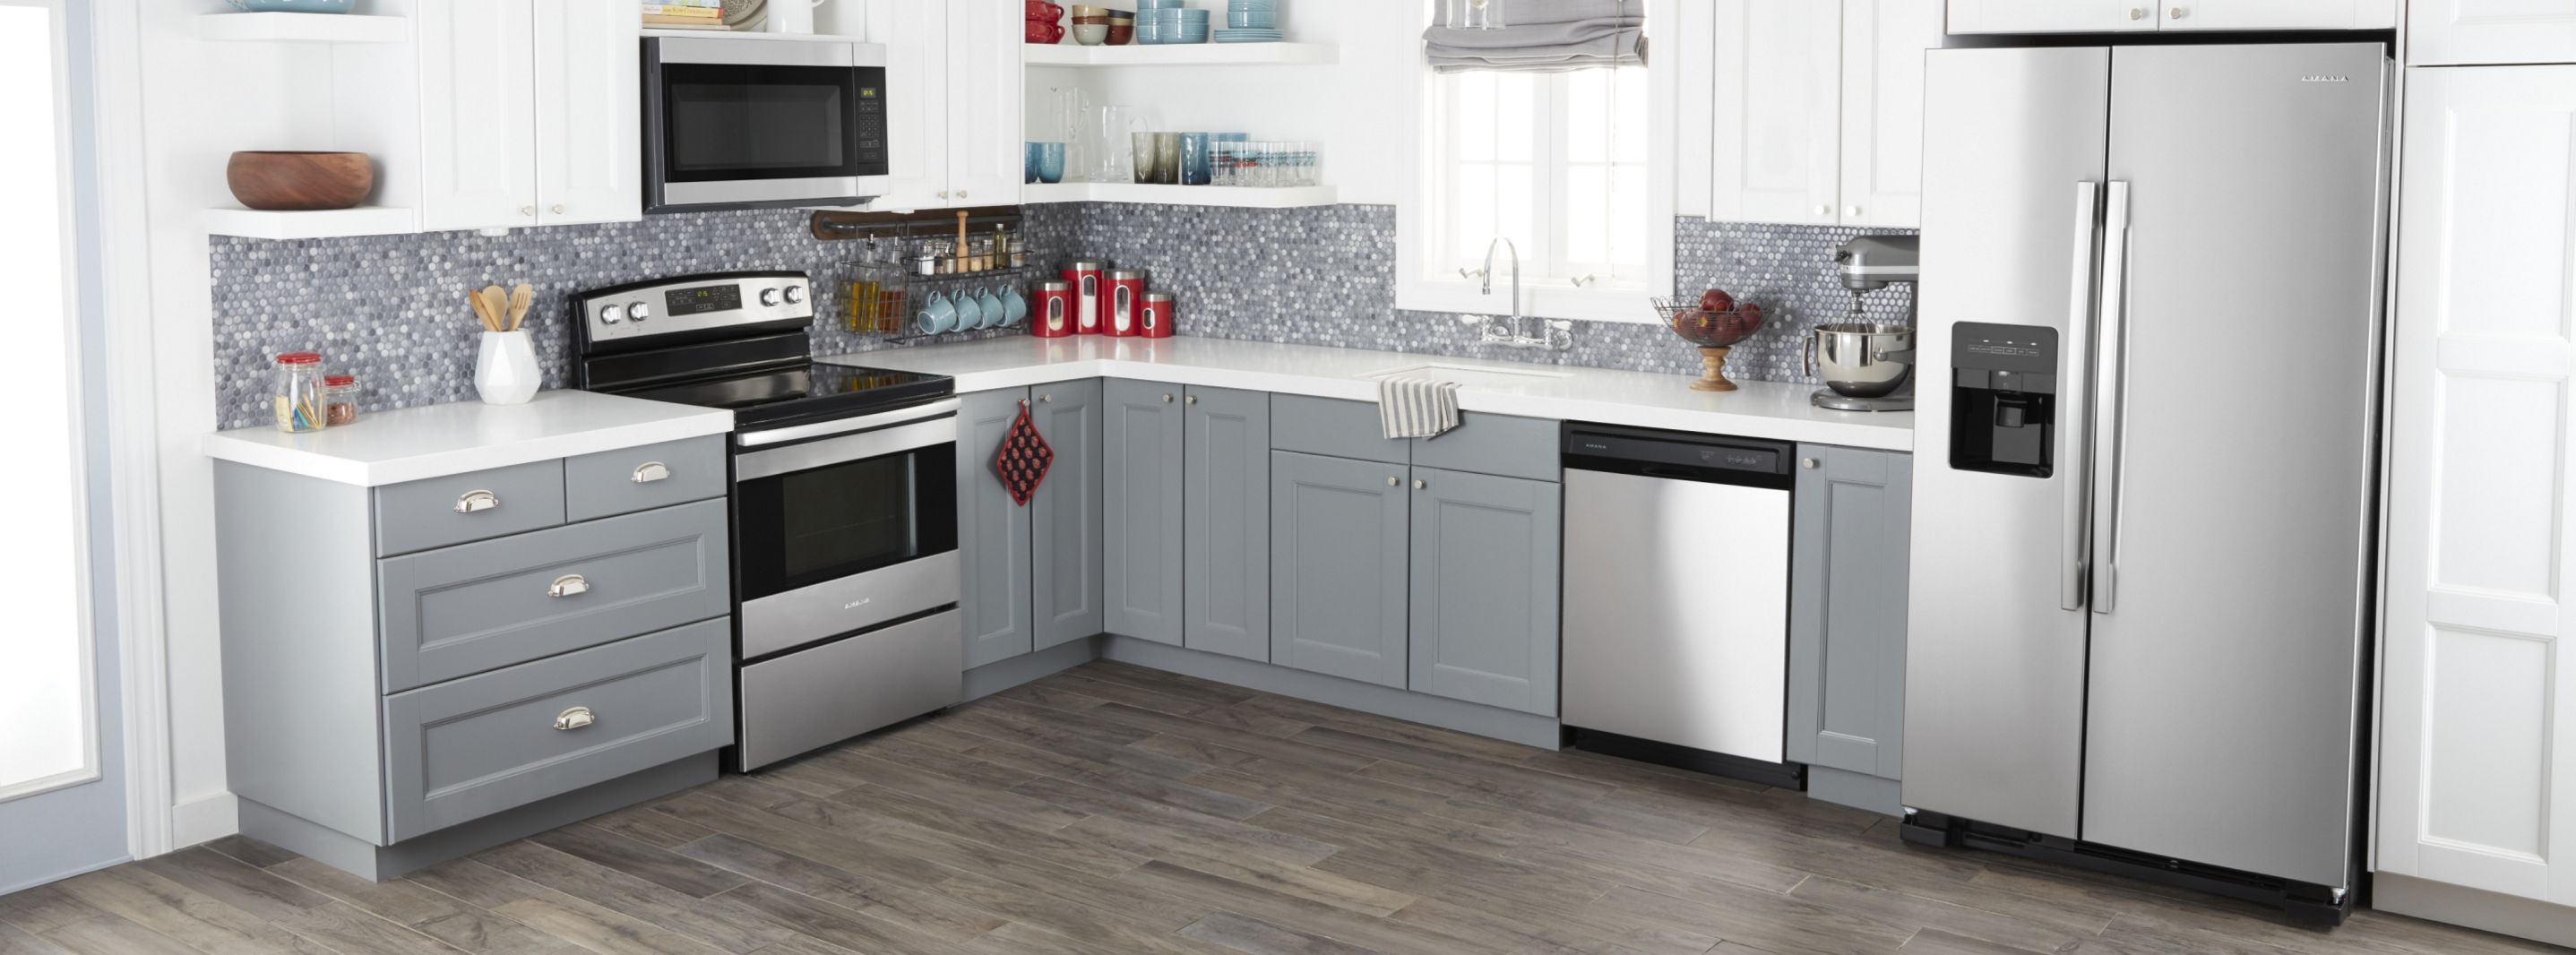 Amana® appliances set in gray cabinetry